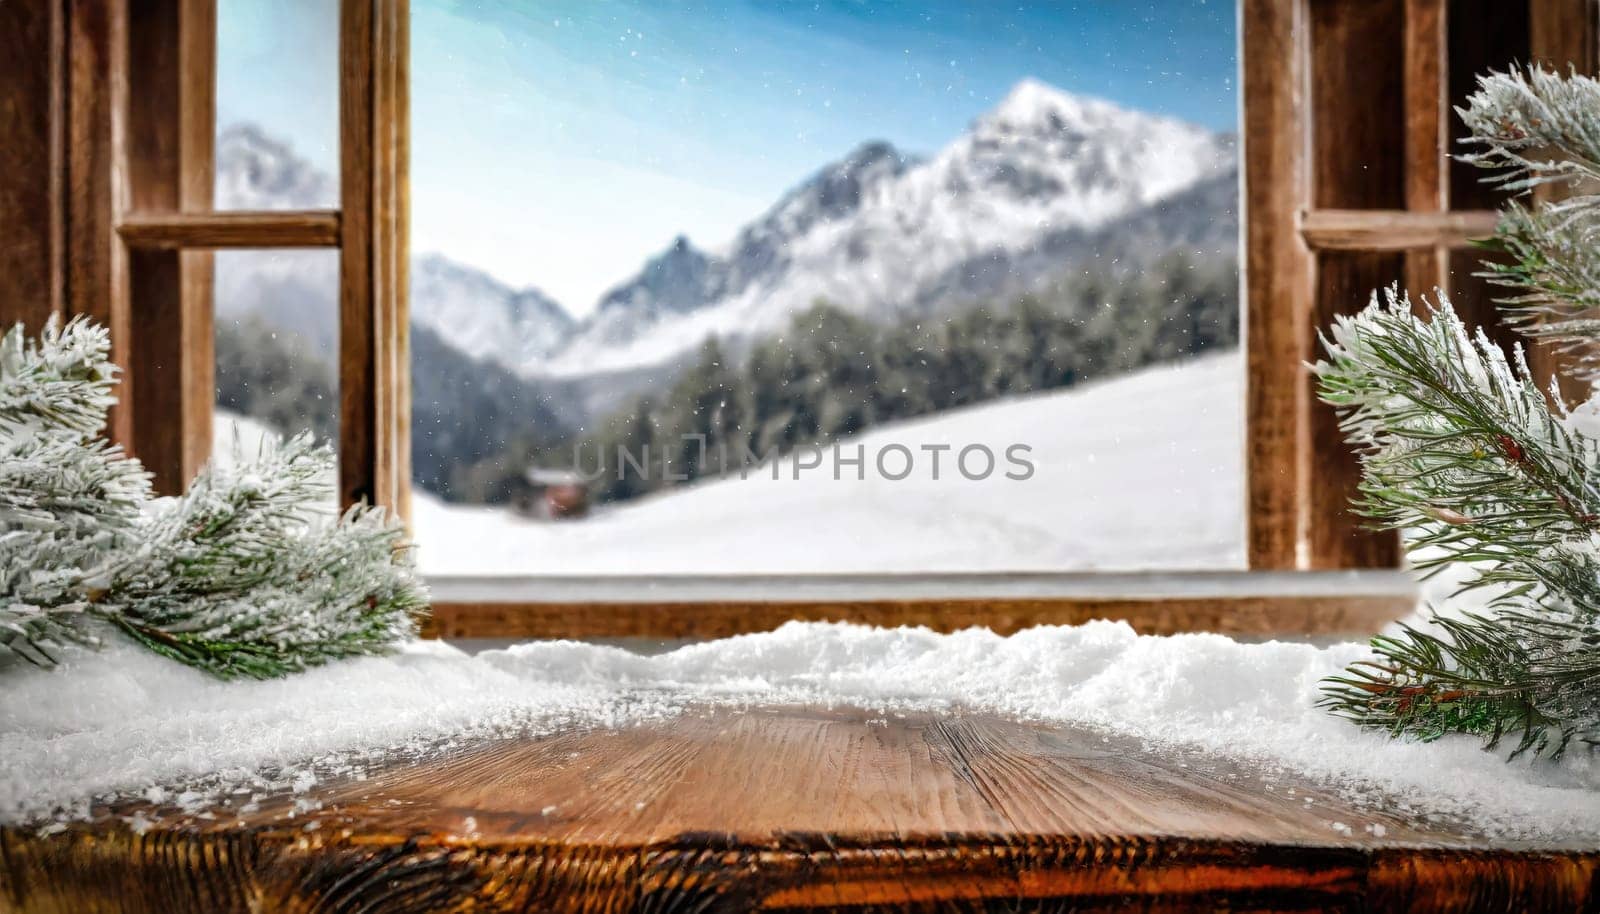 Wooden desk cover of snow and frost with christmas tree branch decoration.